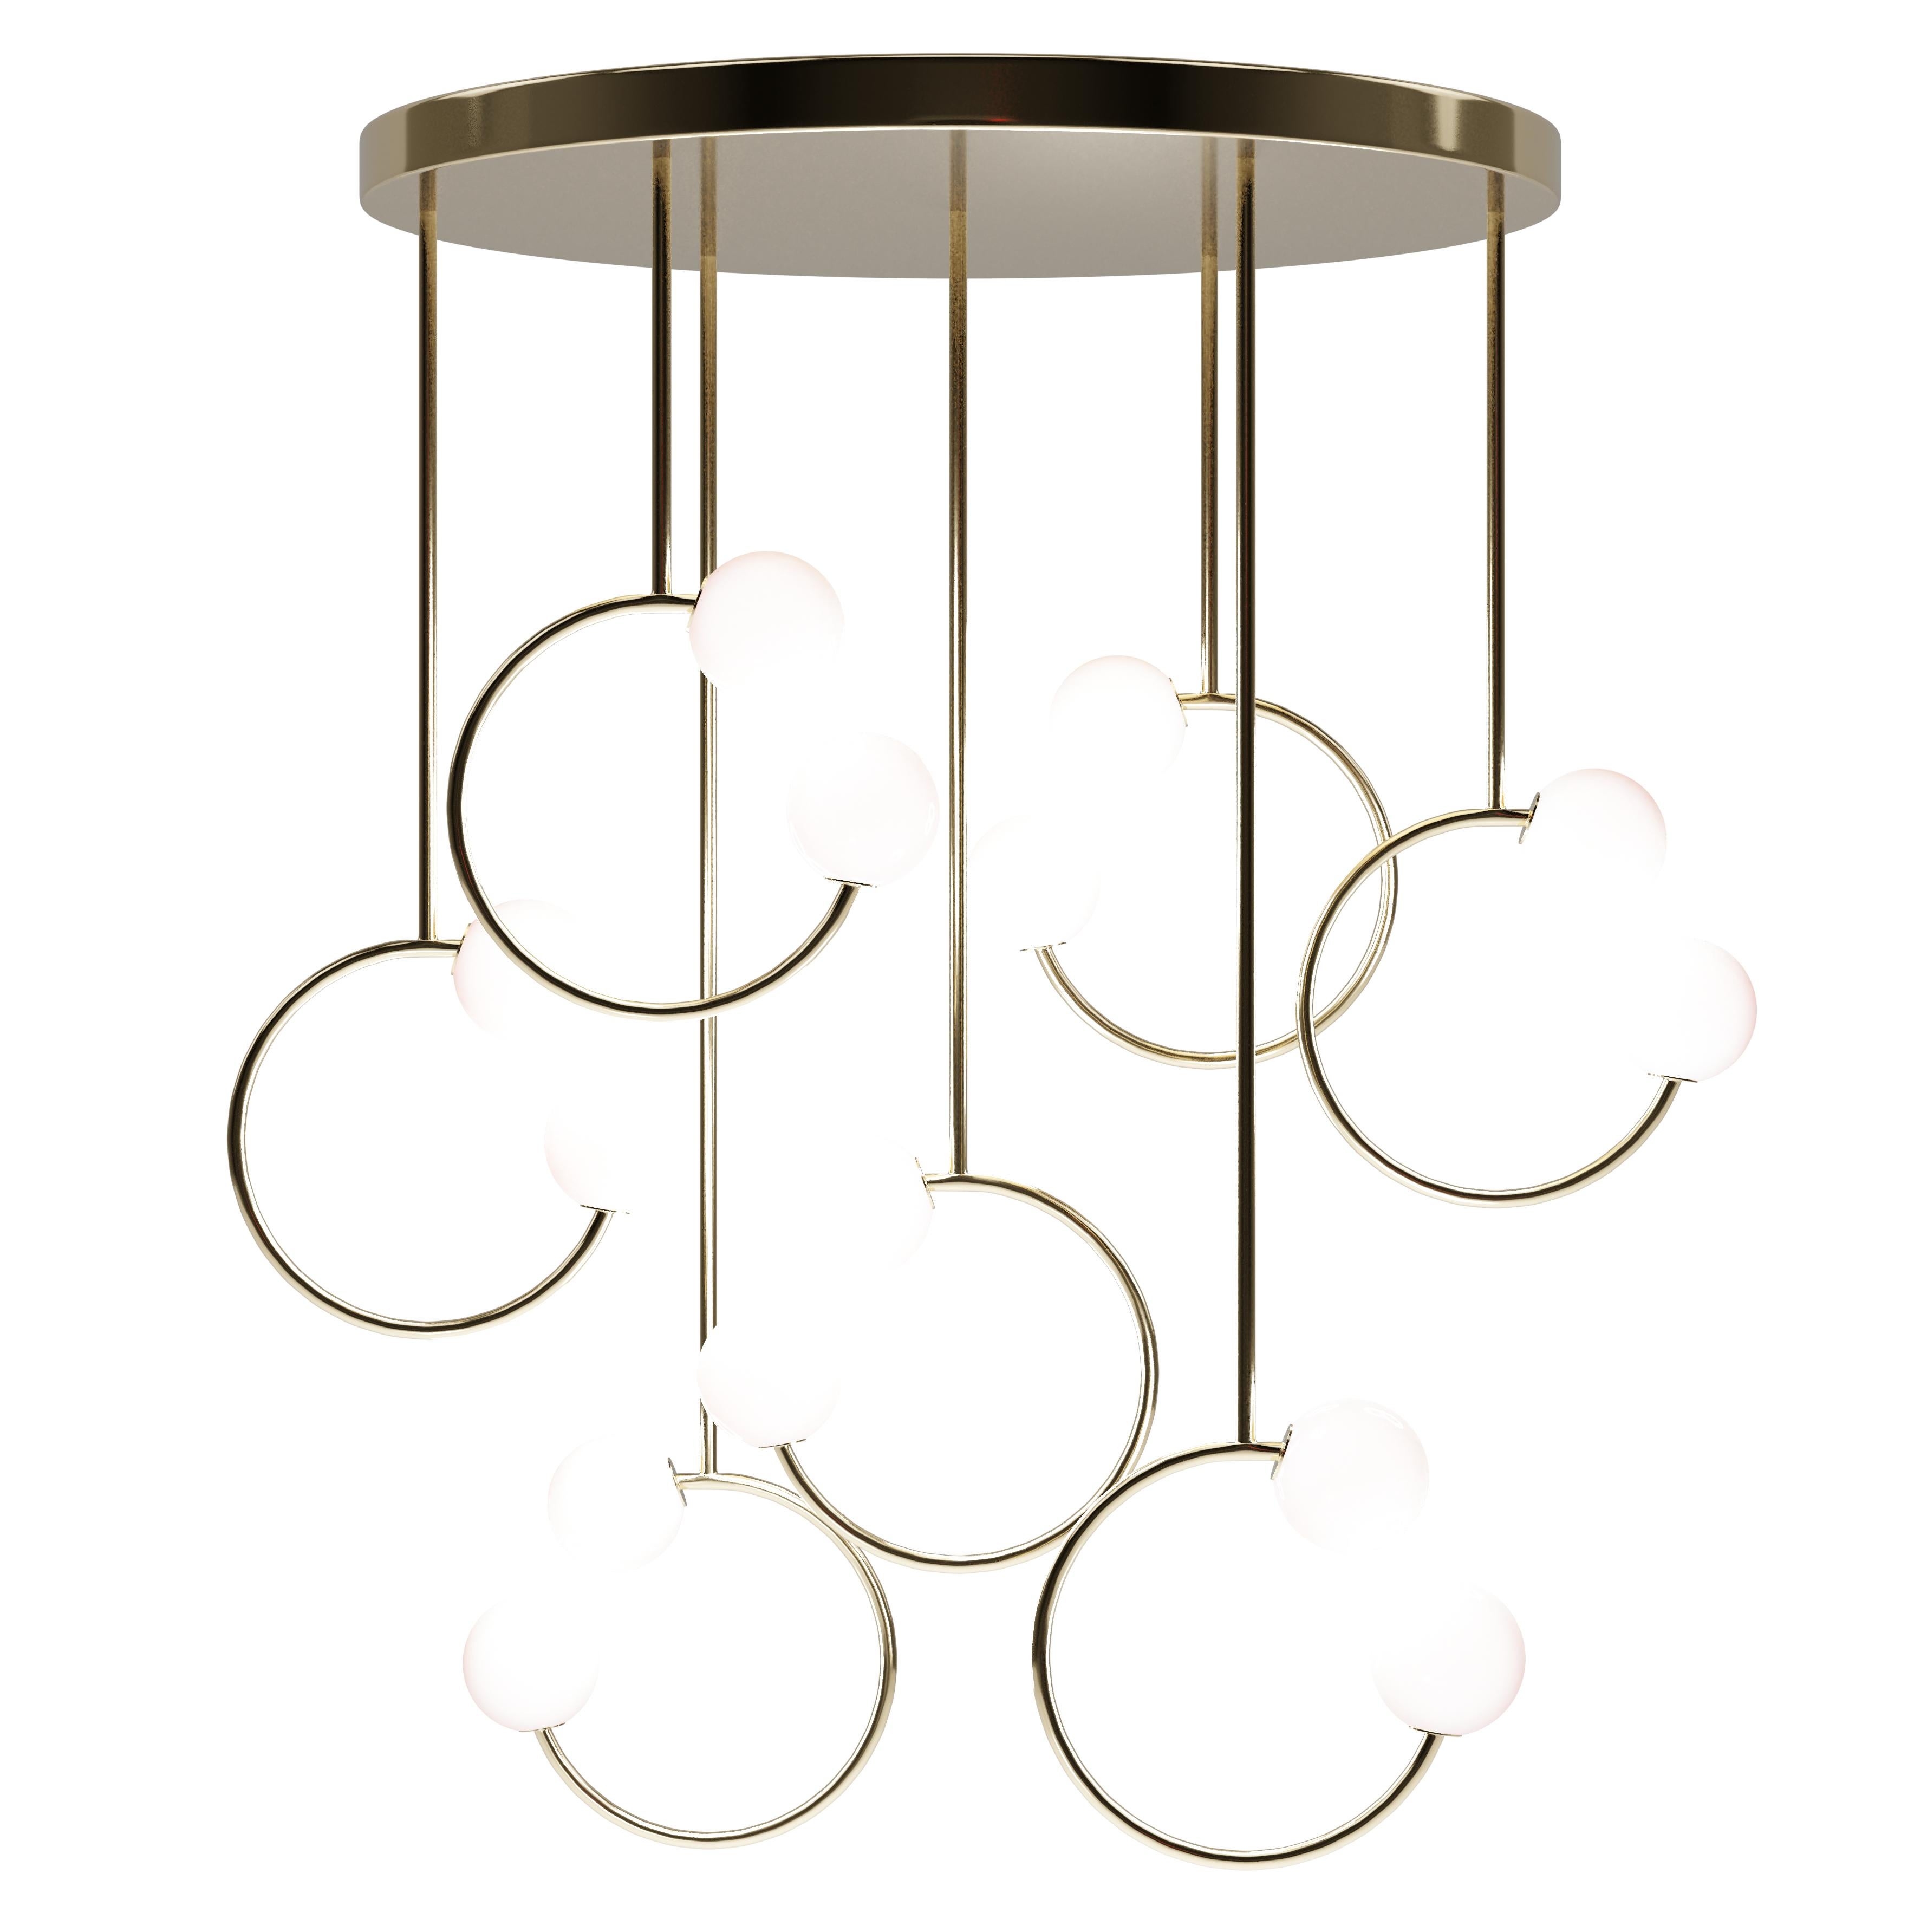 Gaby's dream ceiling lamp, Royal Stranger
Dimensions: W 90 x D 90 x H 130 cm
Materials: Brass, glass.

Finish options
Body available in brass, stainless steel and copper with polished or brushed finish, or lacquered in all NCS/RAL colors with